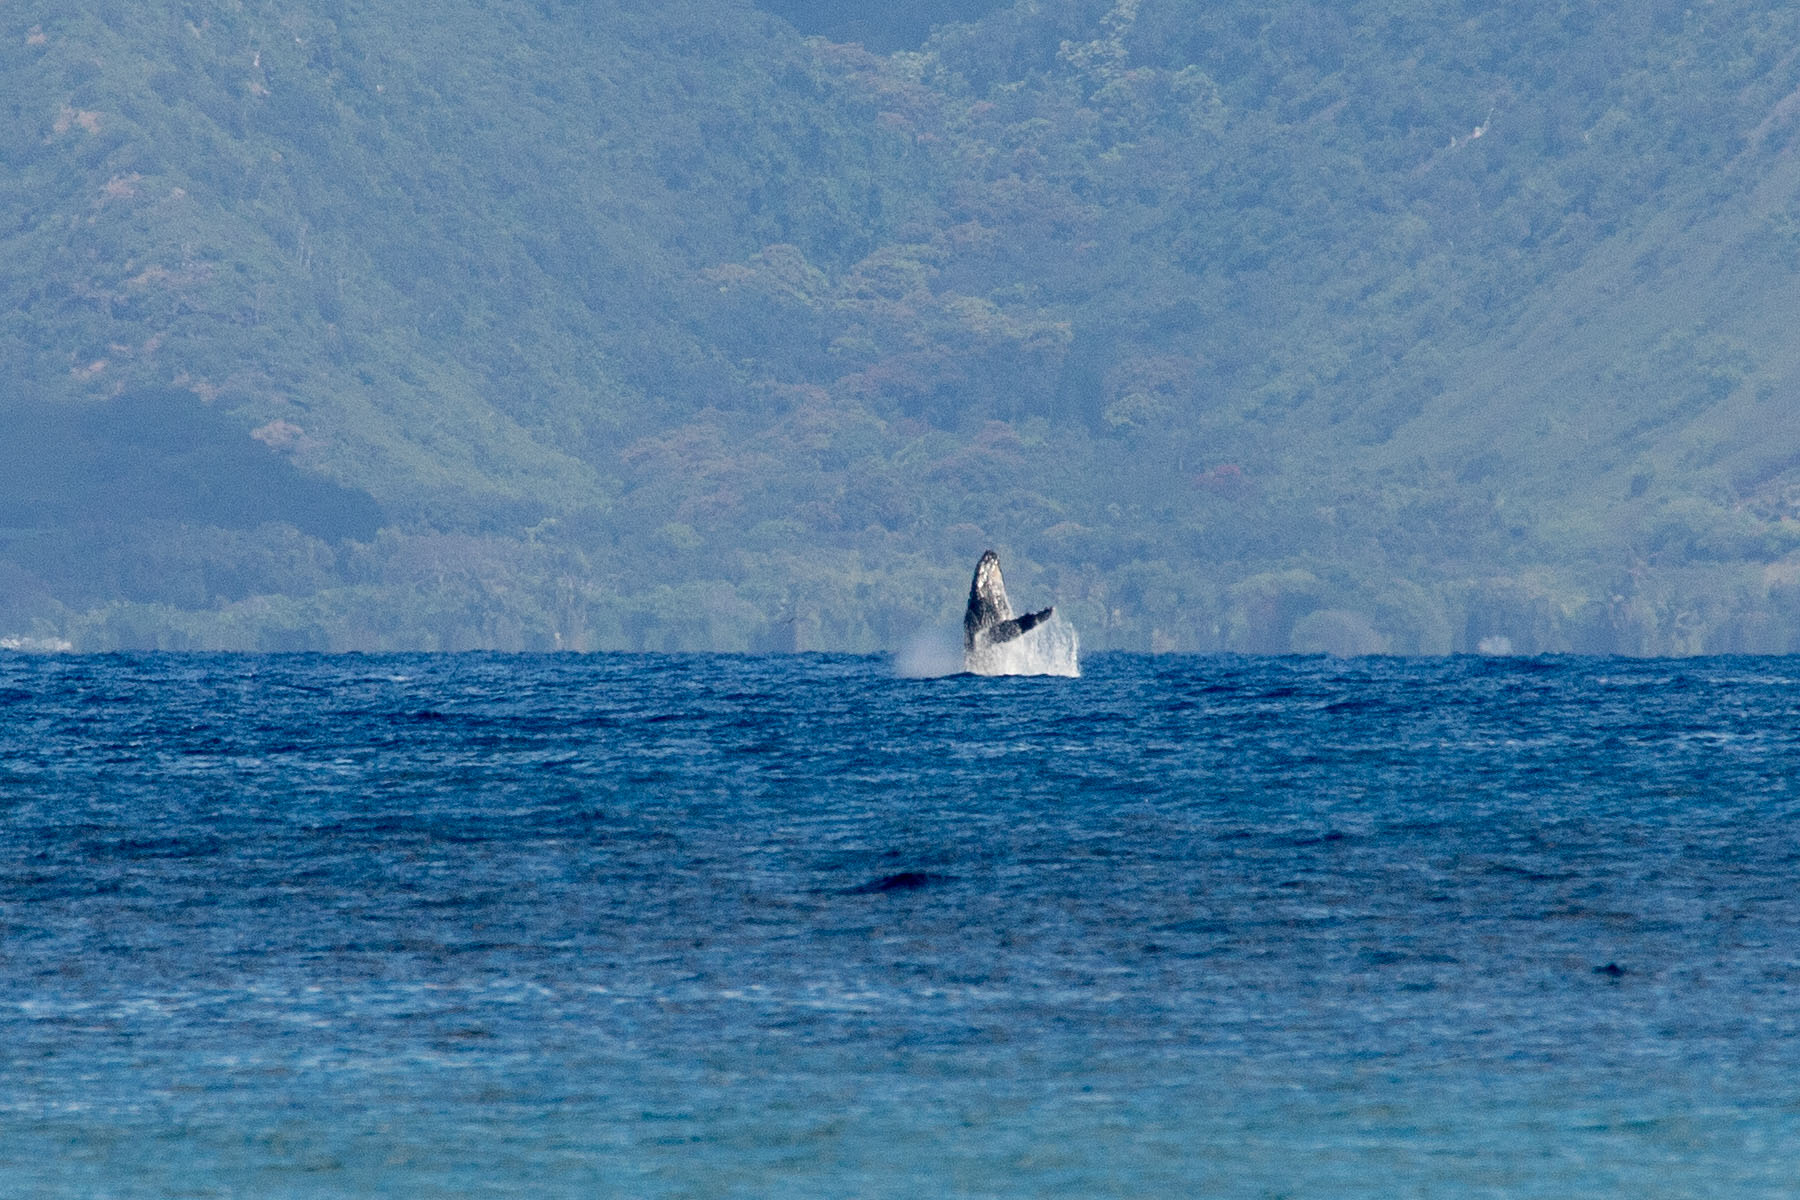 Whale breaching, taken from the Maui shore.  Click for next photo.